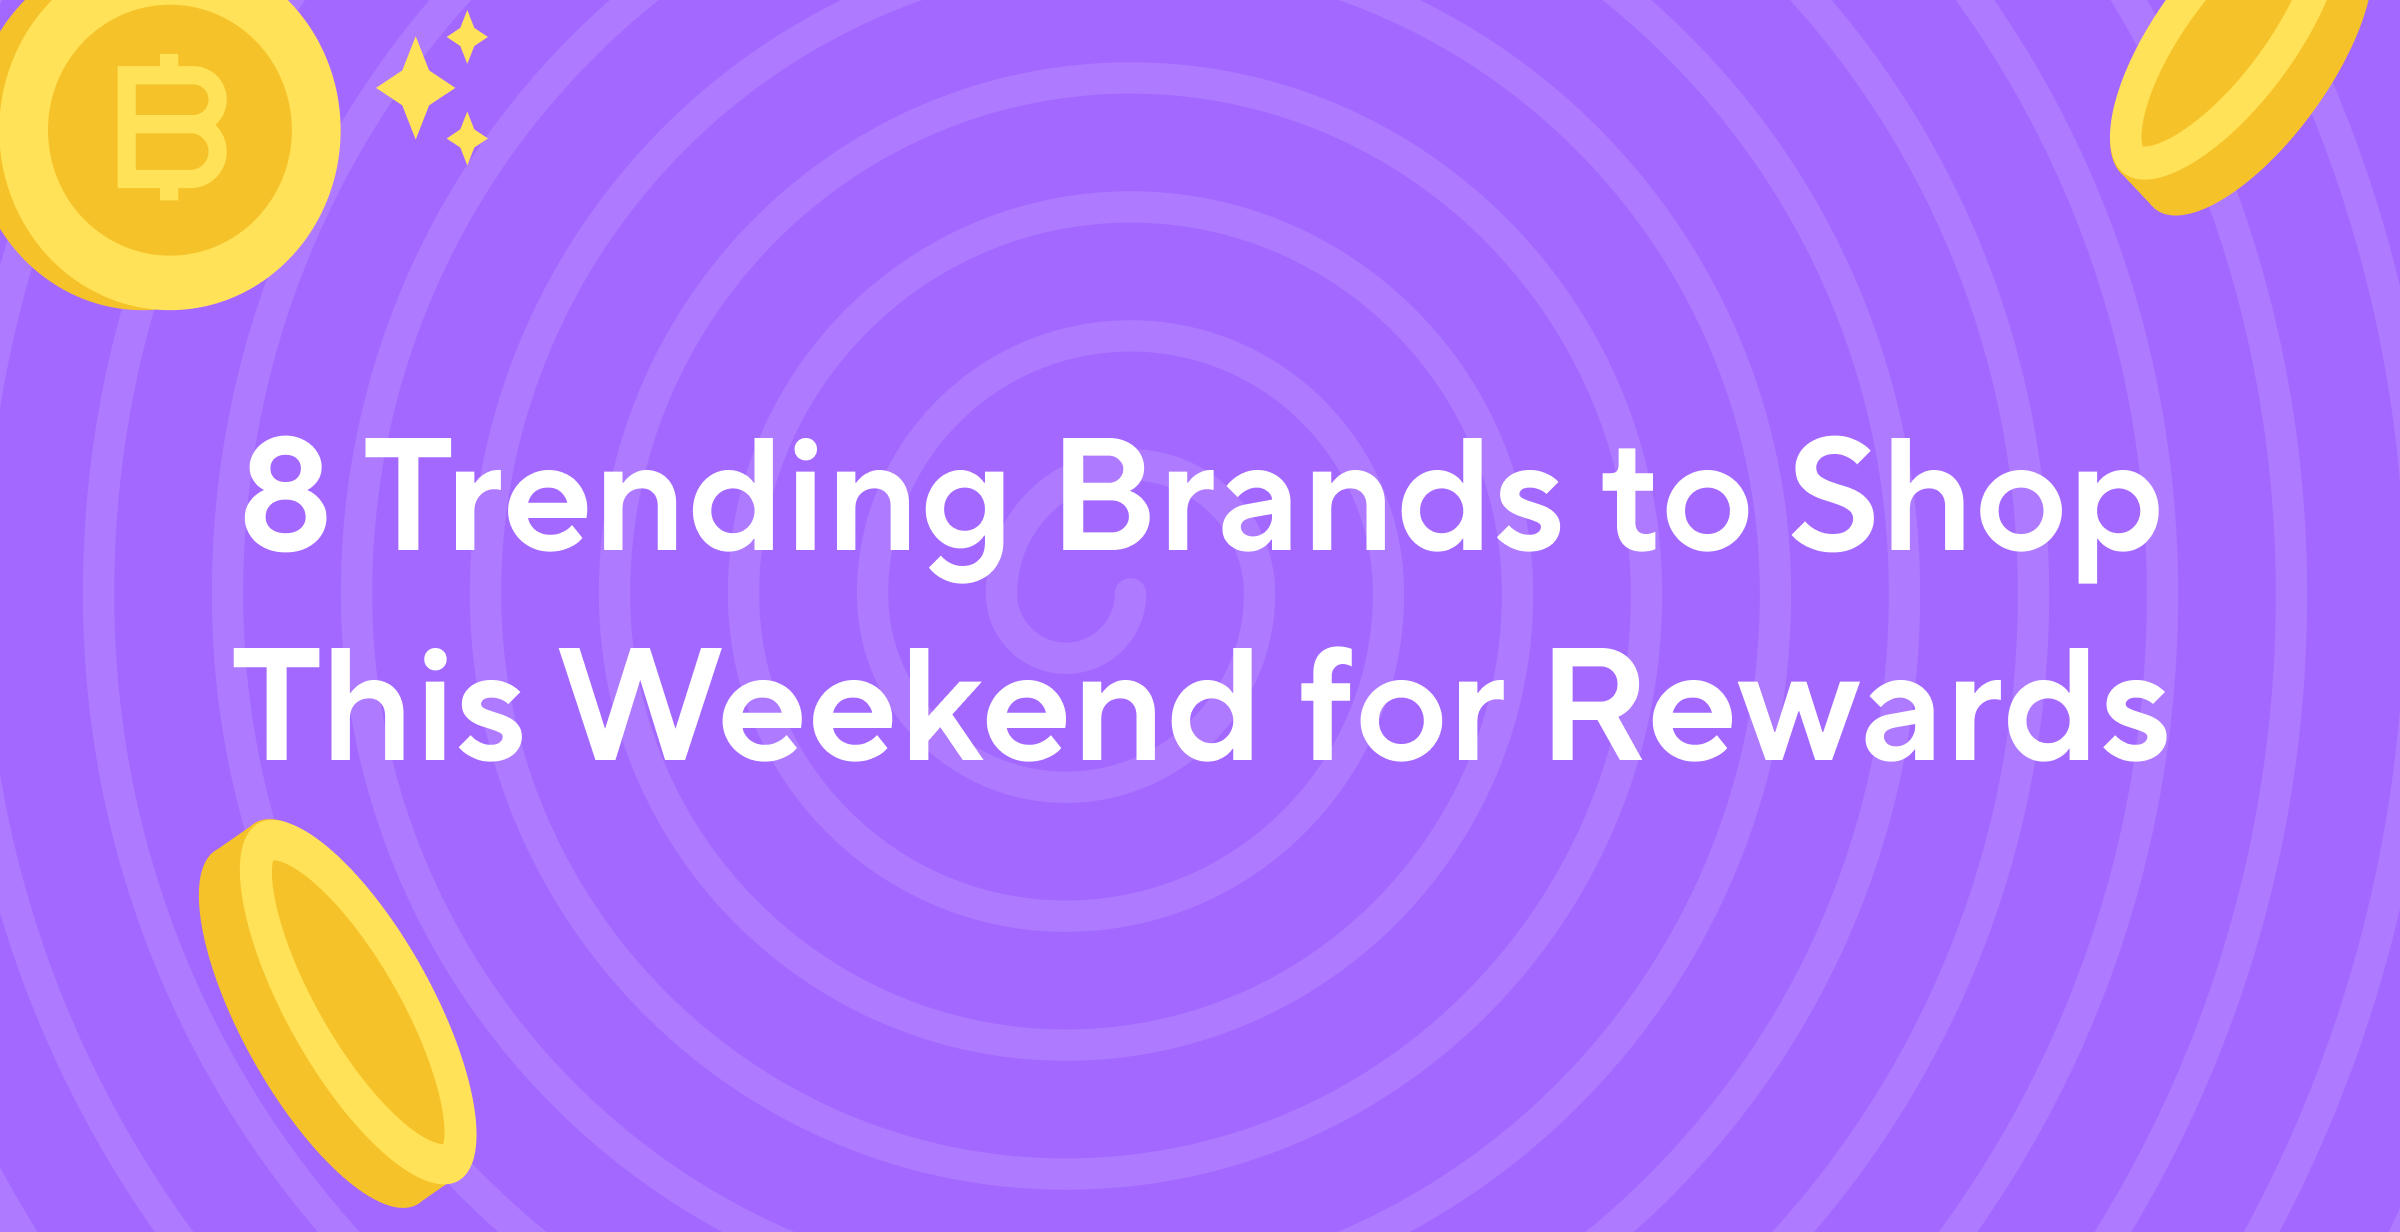 8 Trending Brands to Shop This Weekend for Bitcoin Rewards